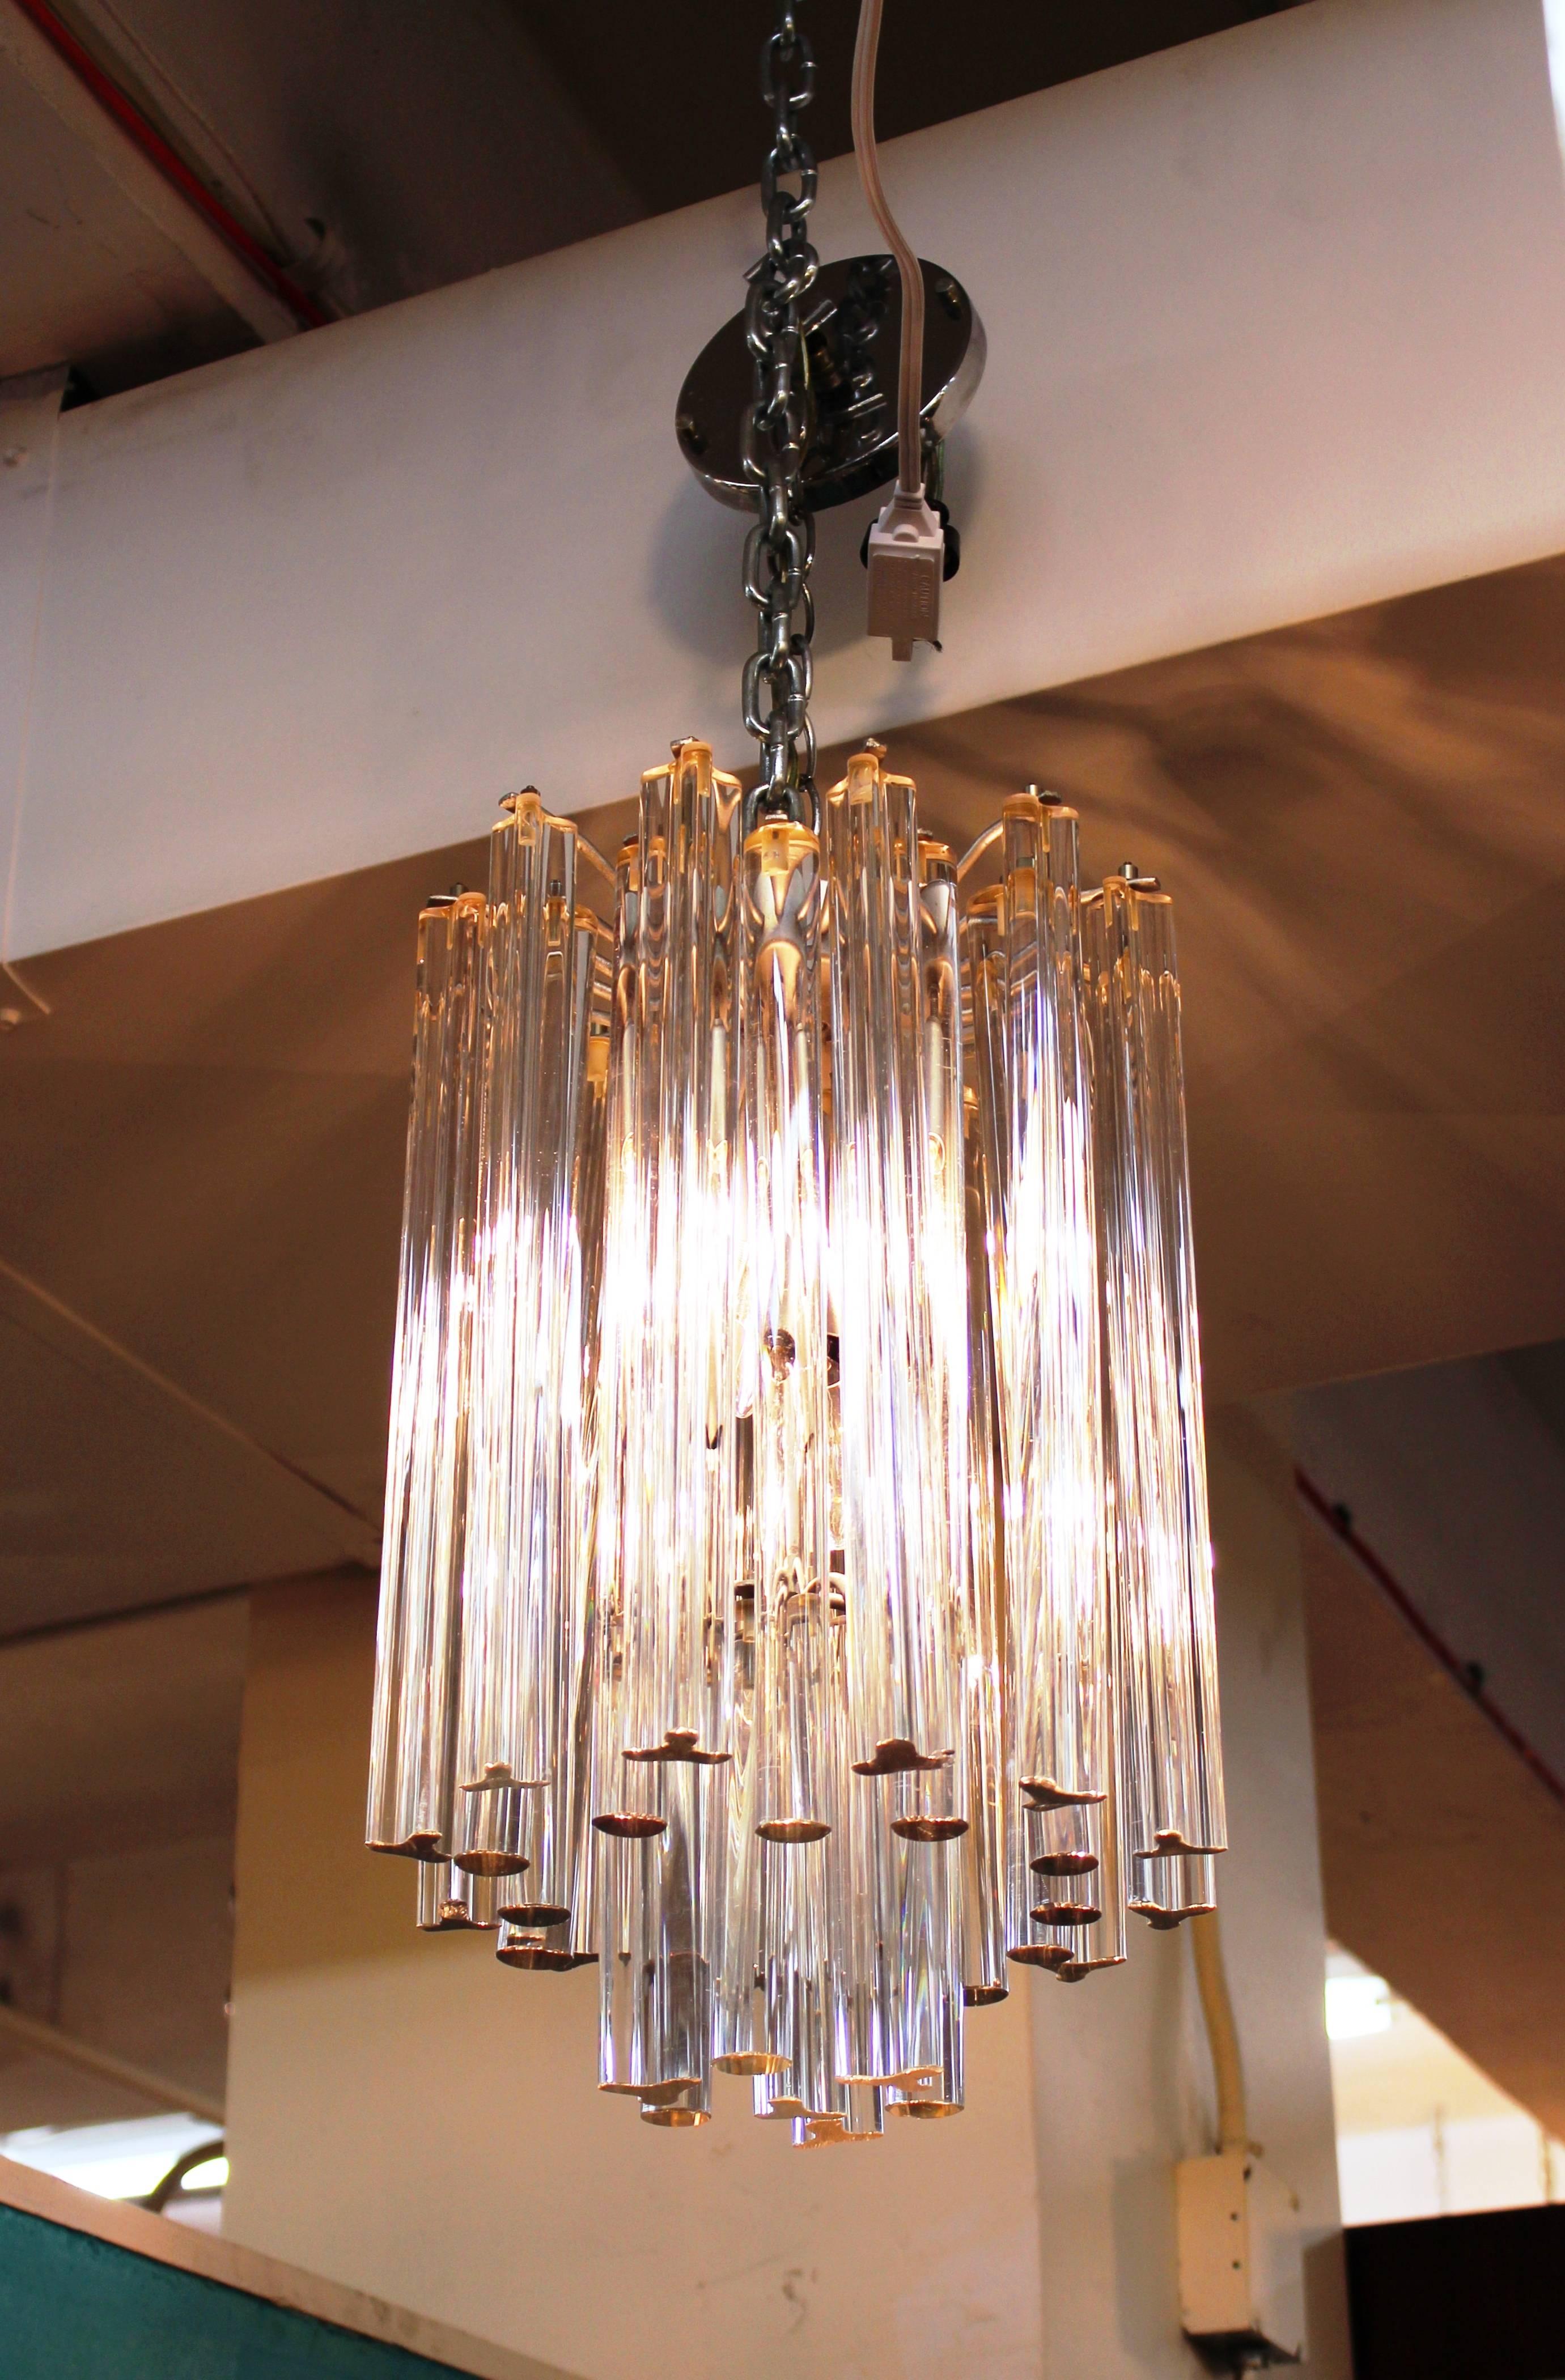 Mid-Century Modern Italian Venini Murano chrome chandelier with round and cut crystals. The piece has secure screw top attachments and has recently been rewired to fit current standards. Takes six candelabra base bulbs. In great vintage